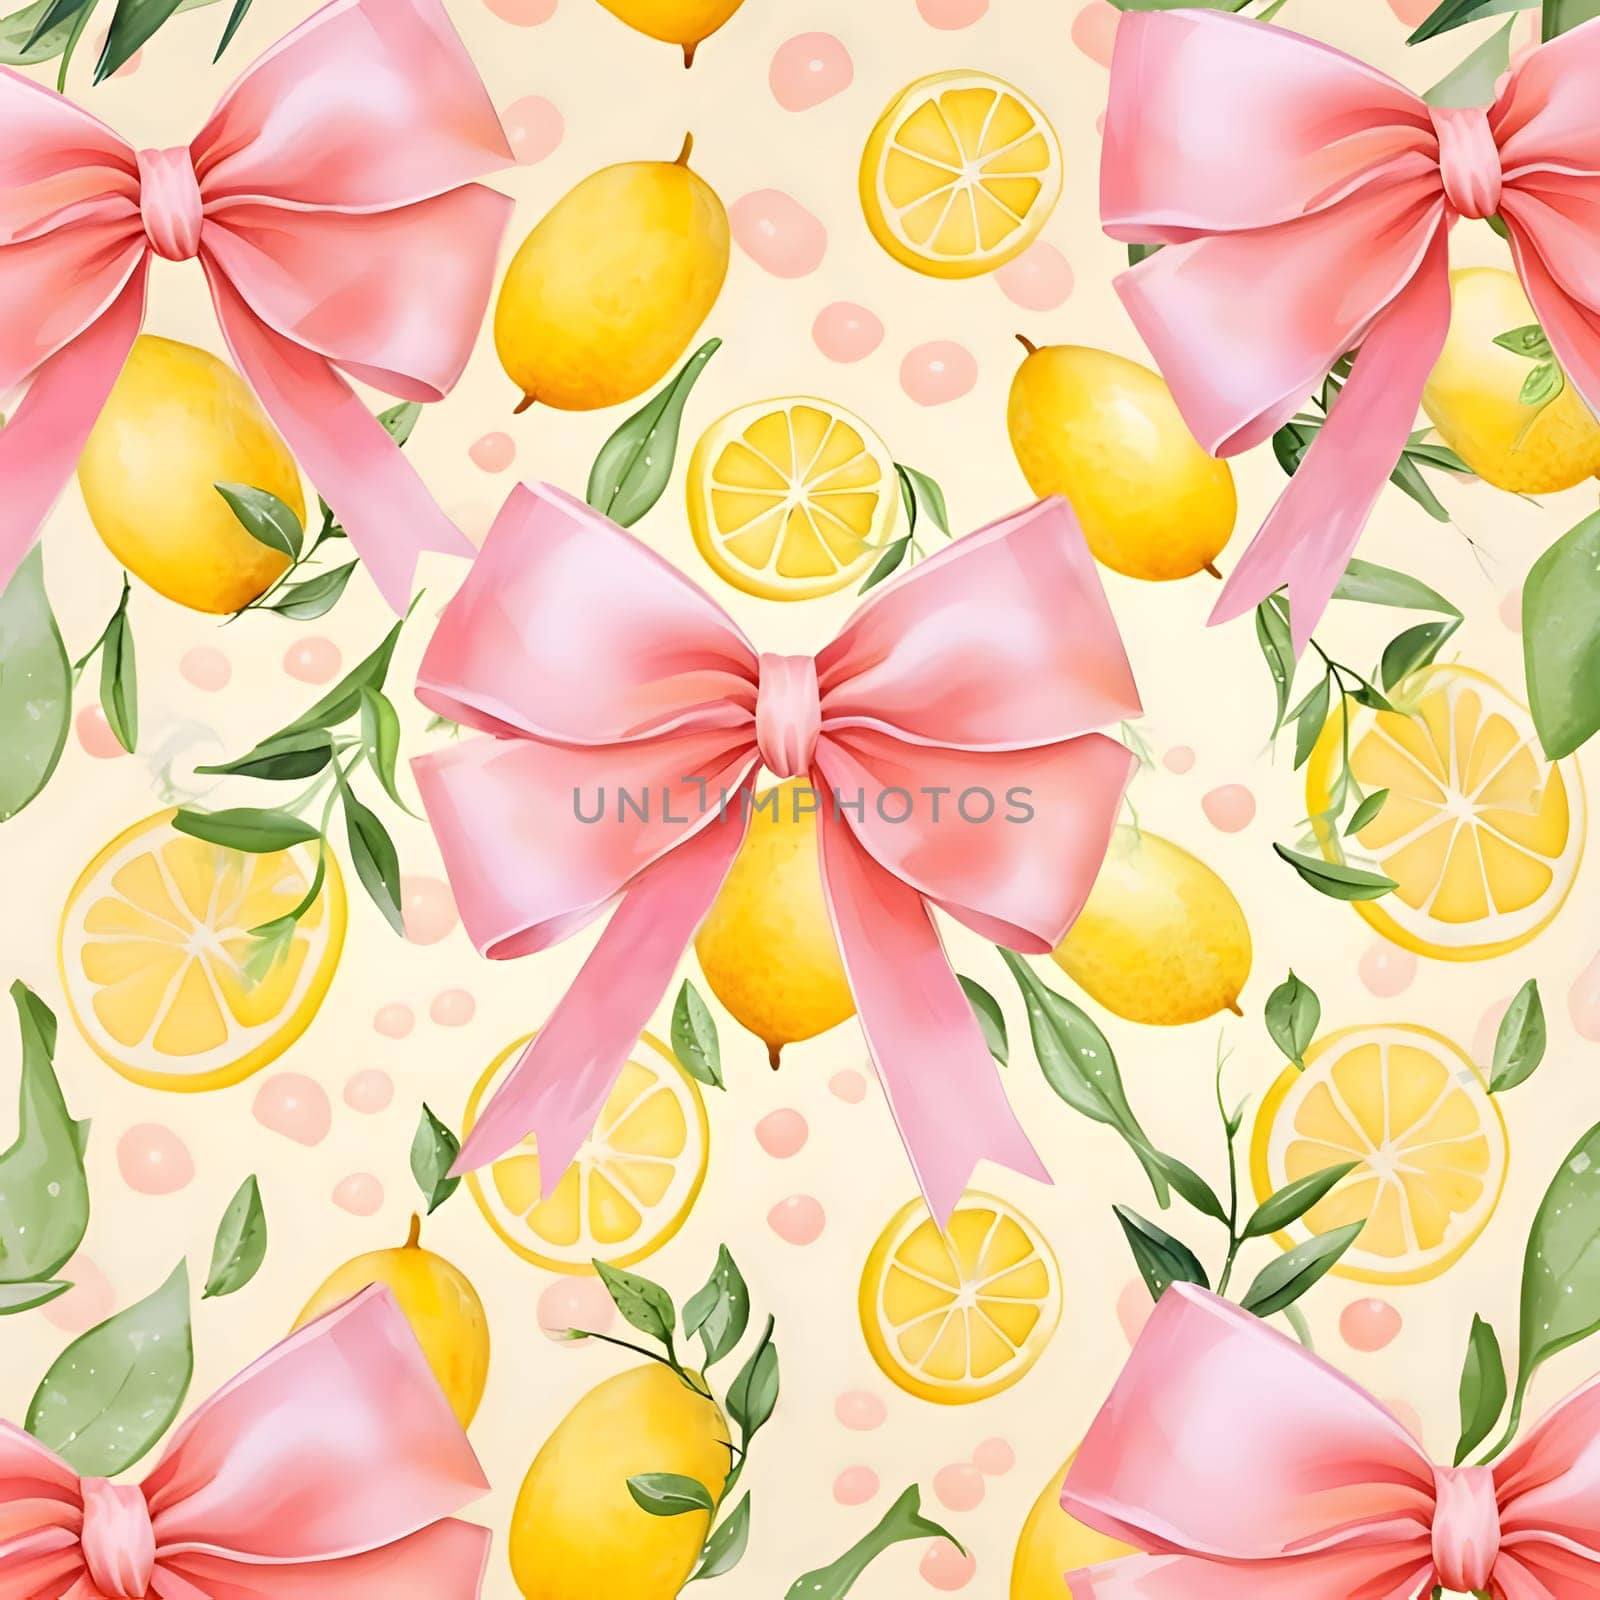 Patterns and banners backgrounds: Seamless pattern with lemons and bow. Vector illustration.